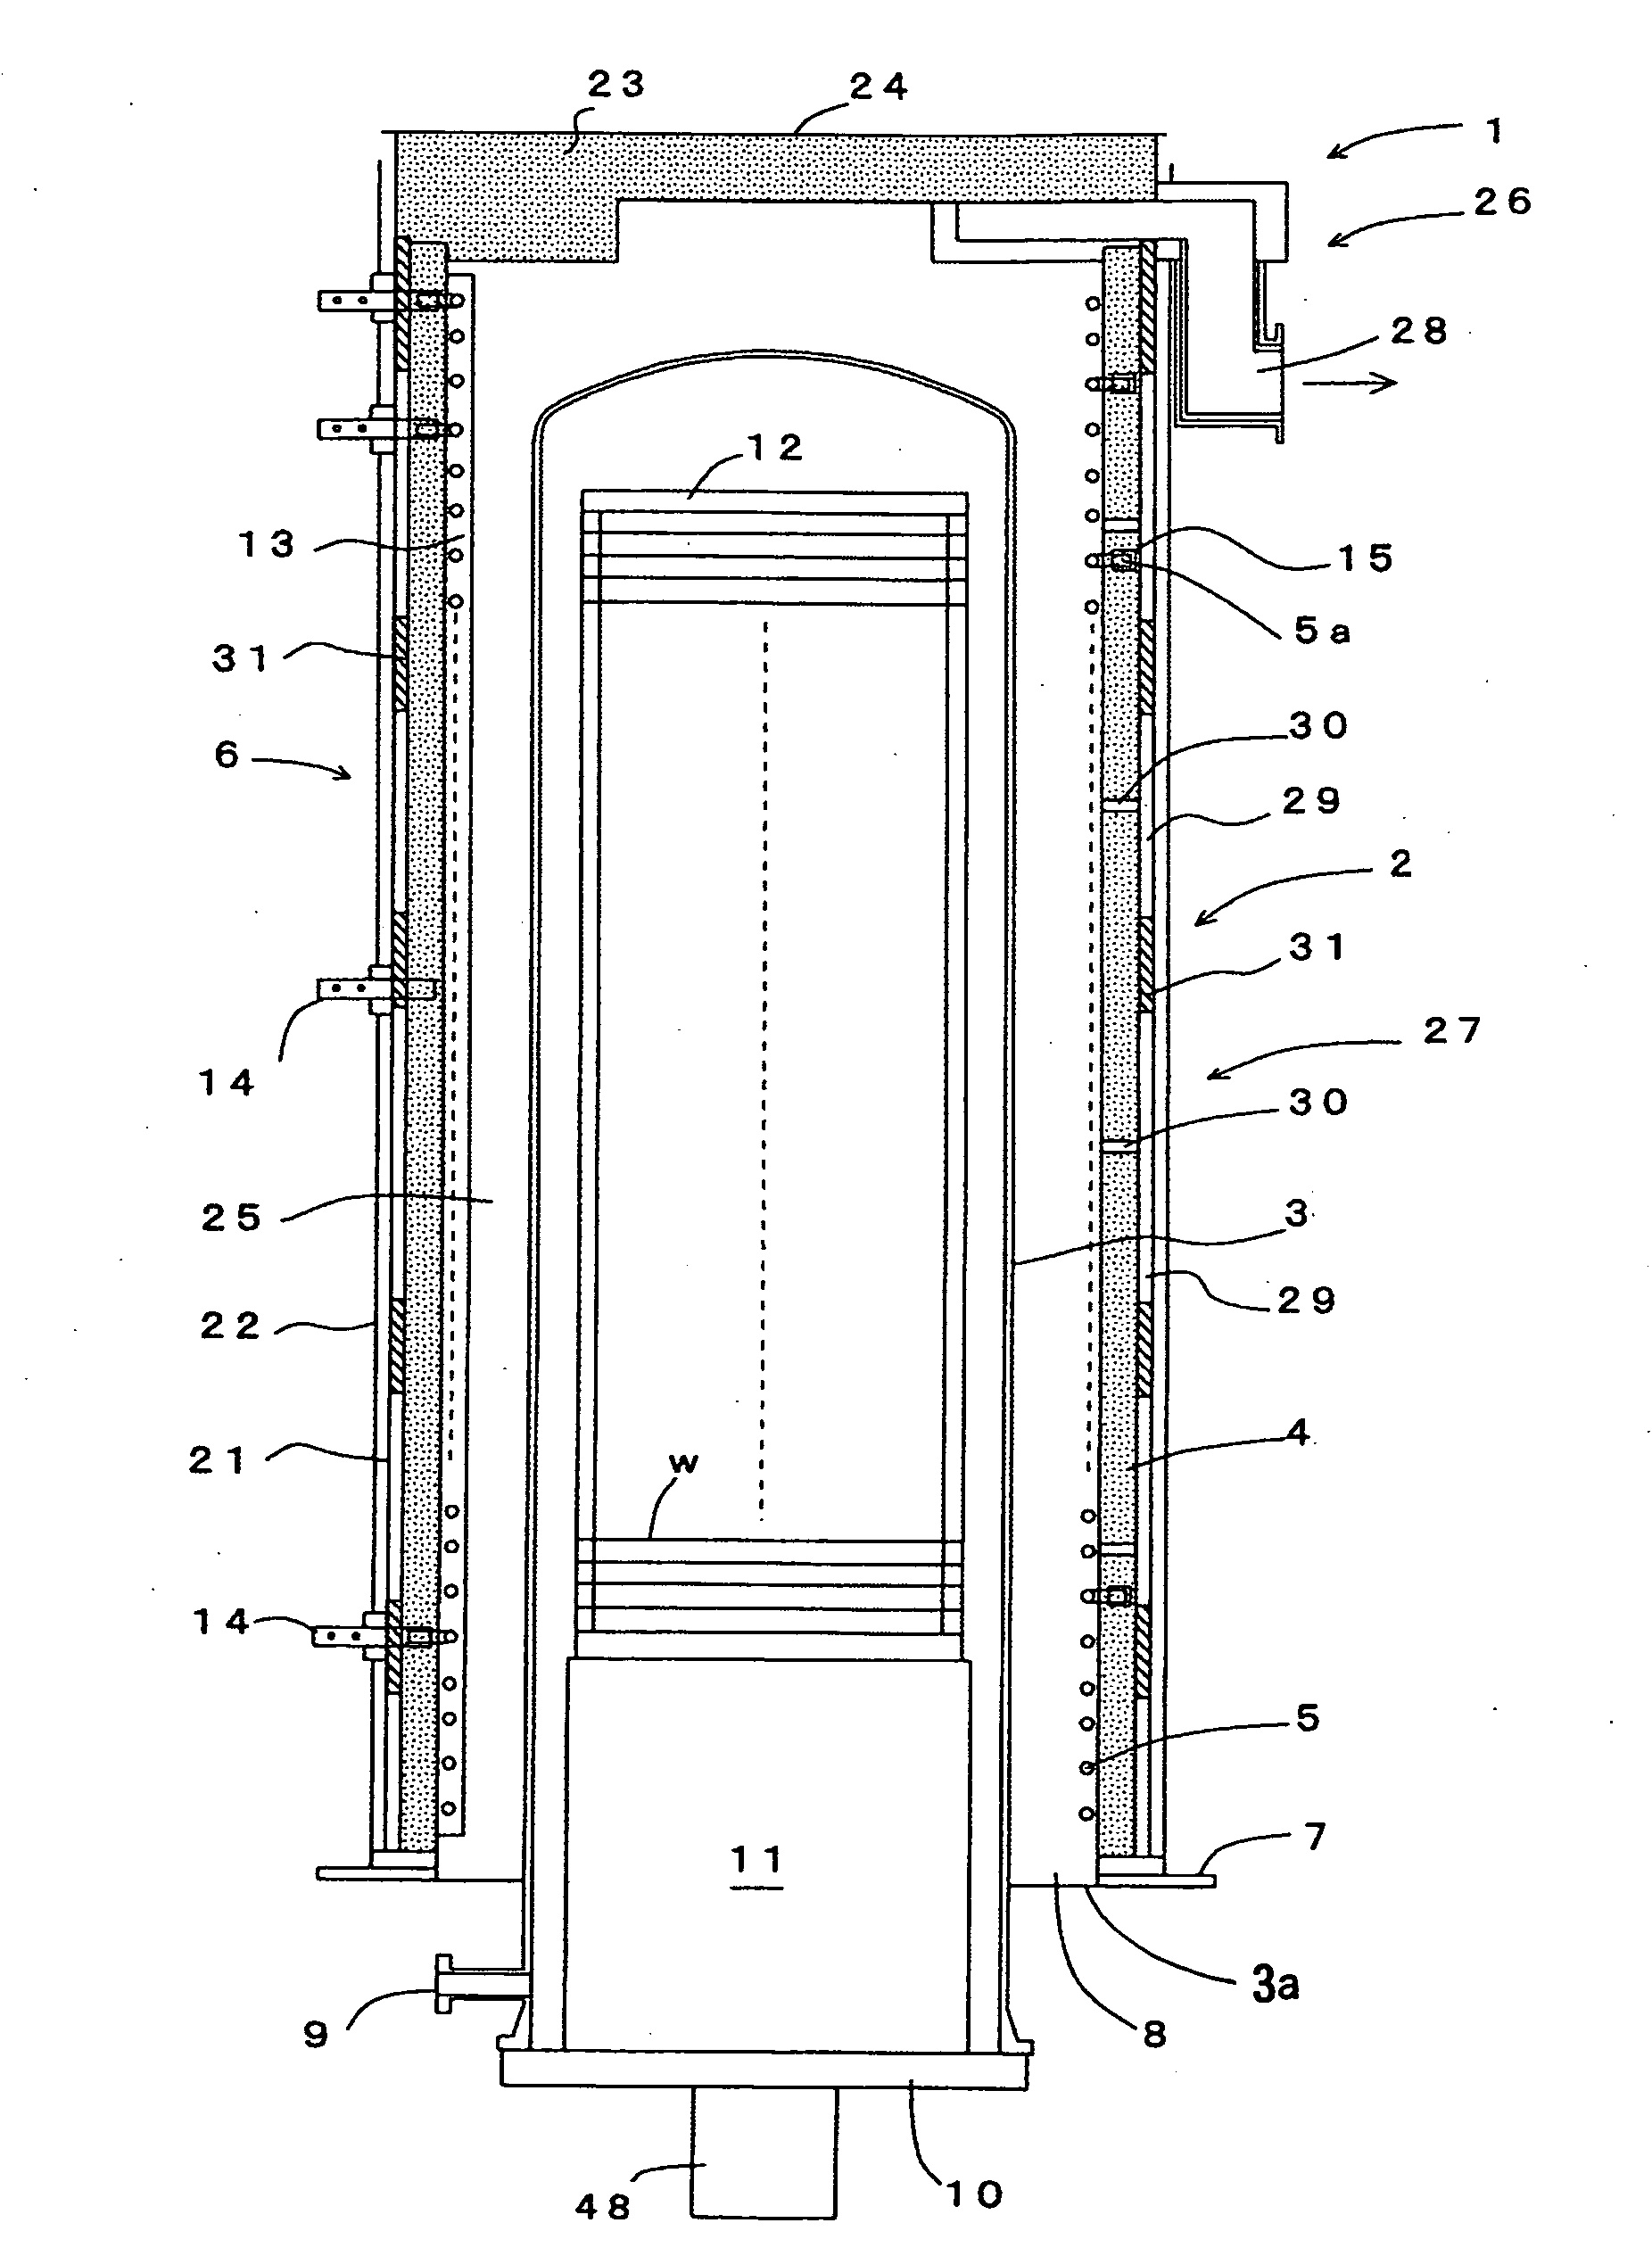 Heat processing furnace and method of manufacturing the same